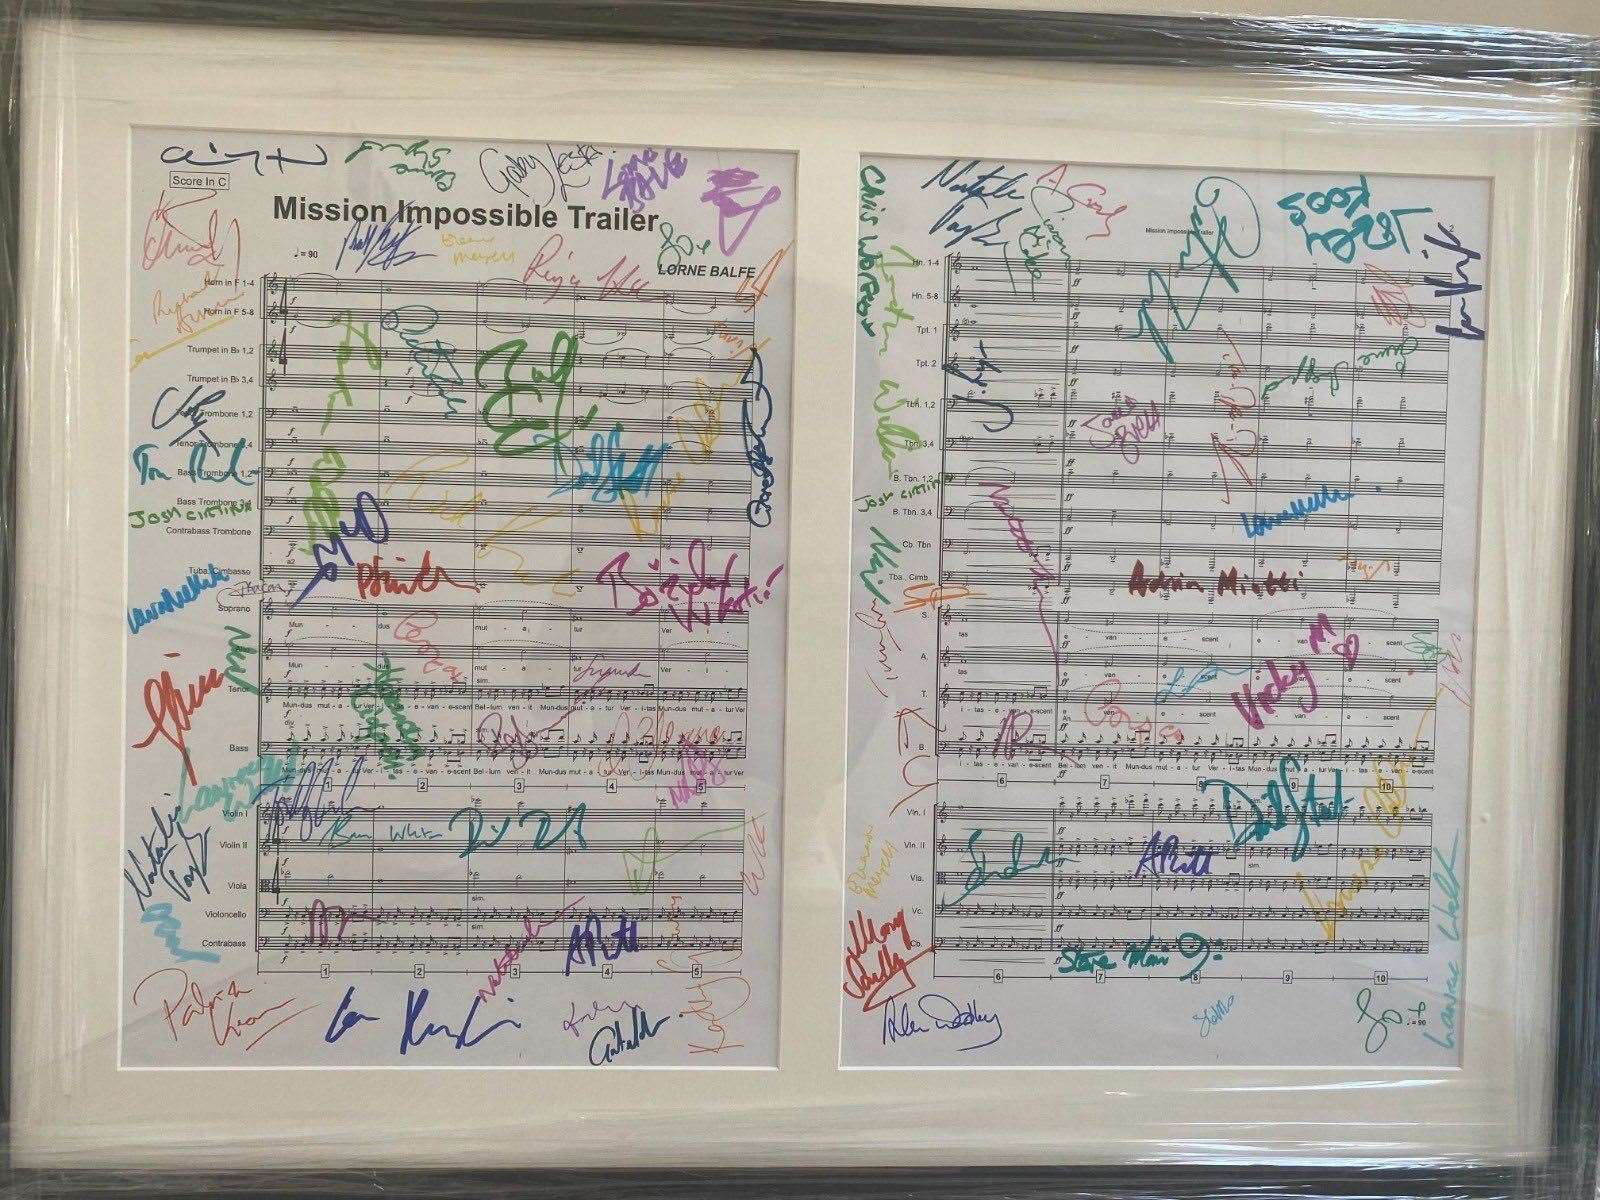 The signed score.